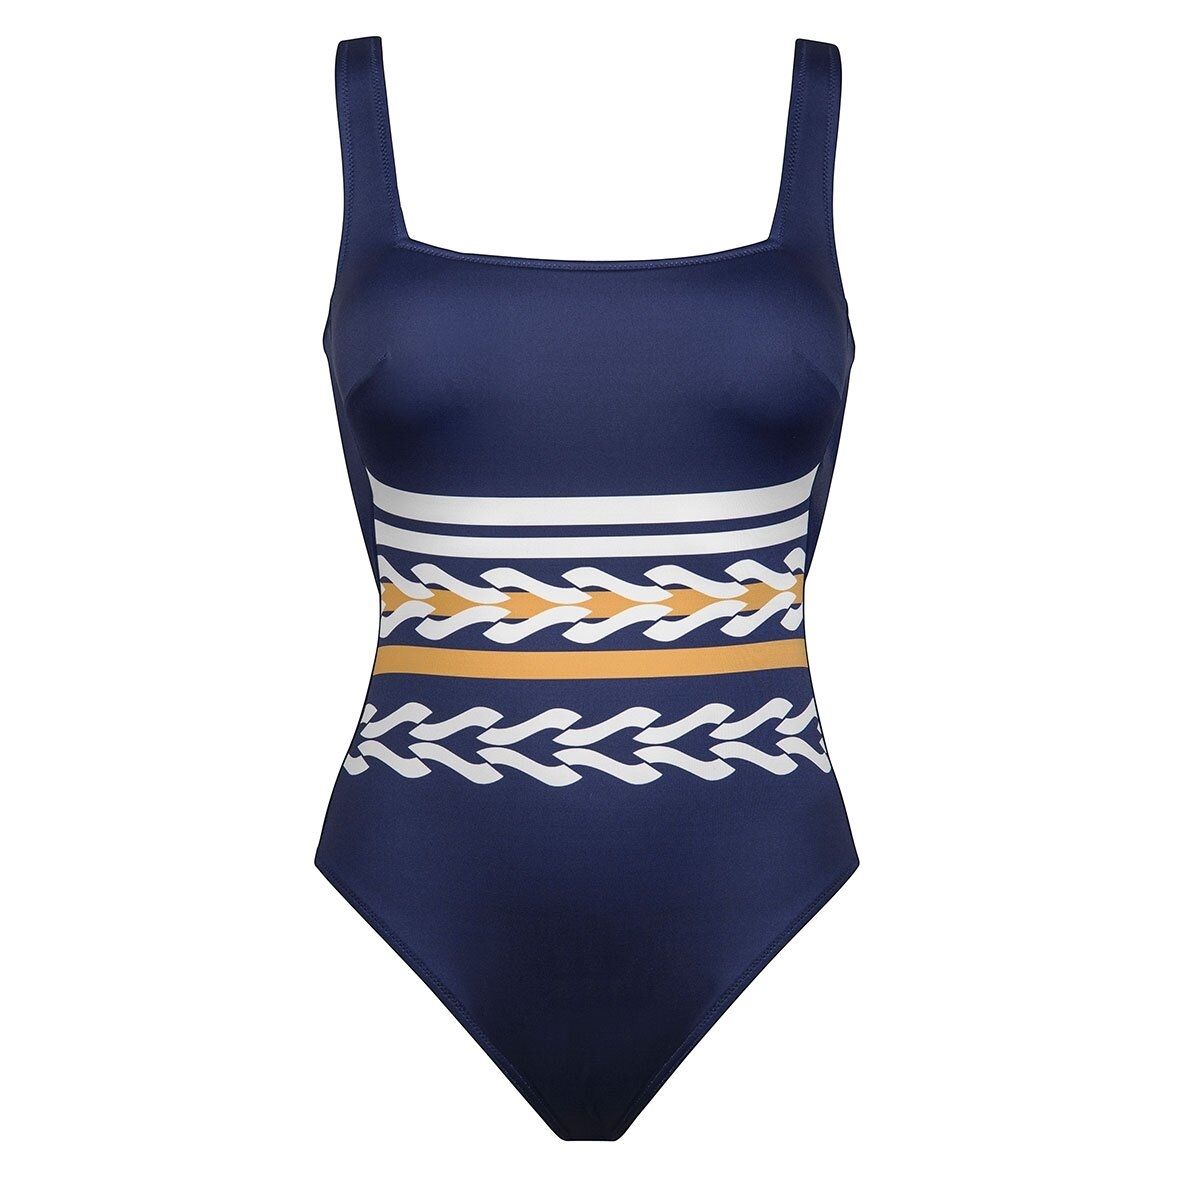 CHARMLINE Maritime Lights shaping swimsuite 1400 | Shaping | slimming ...